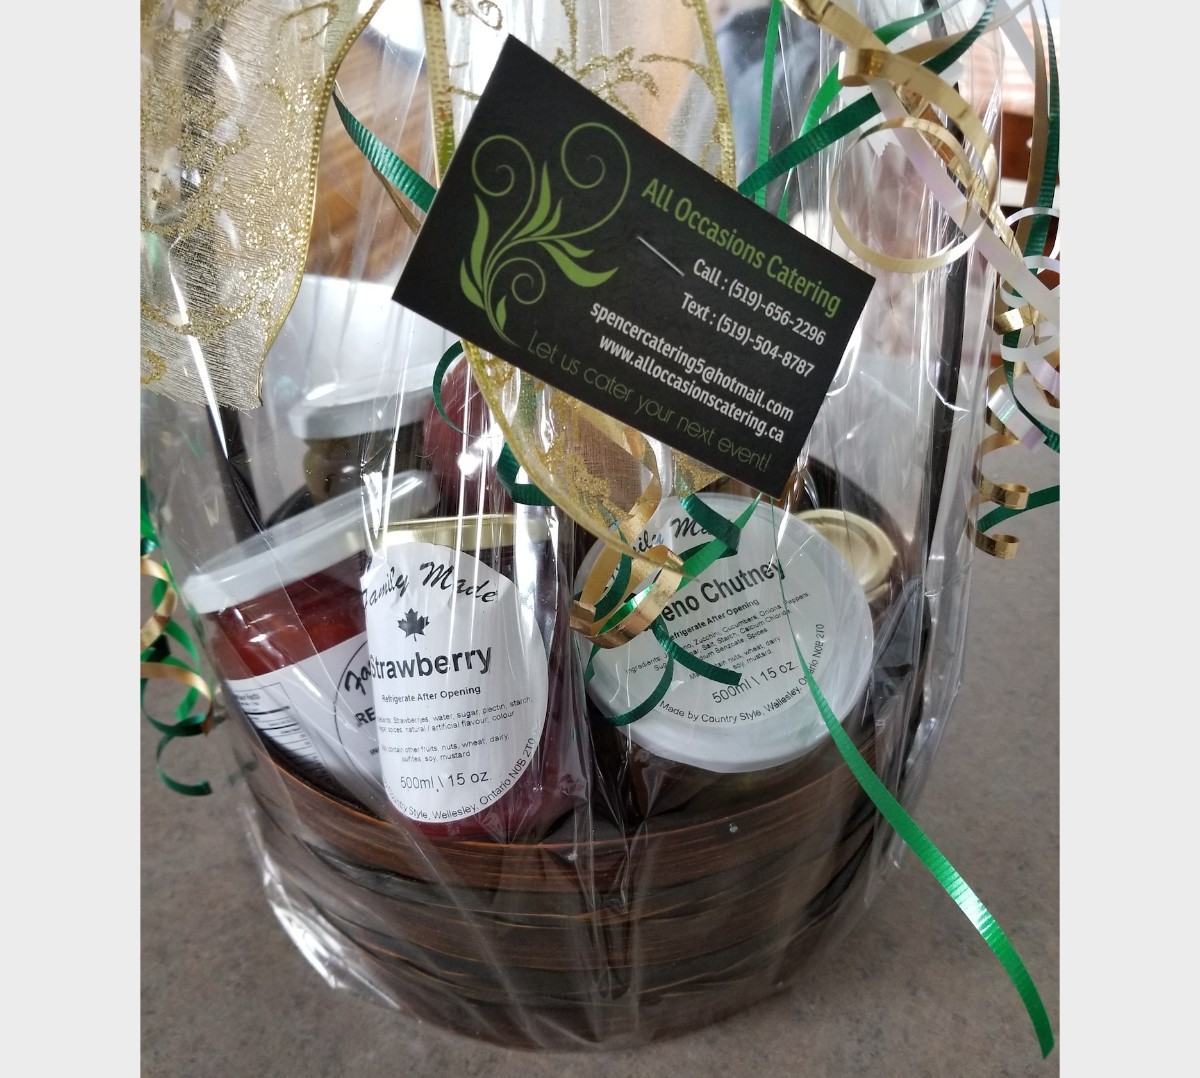 All Occasions Catering Gift Basket